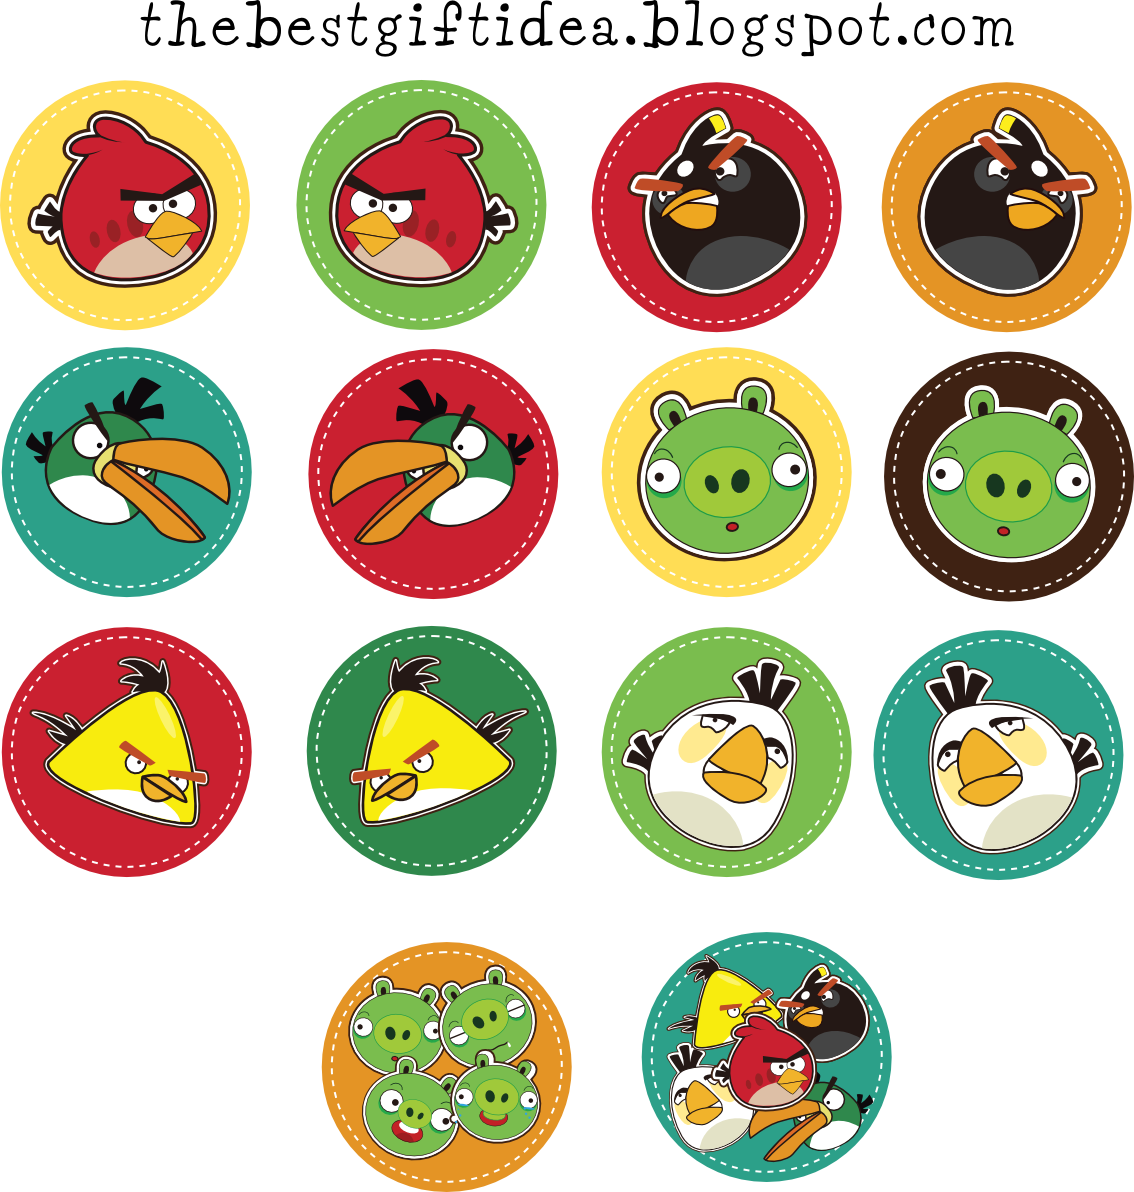 Free Printable Angry Birds Invitation - Angry Birds Images To Print (1134x1192)